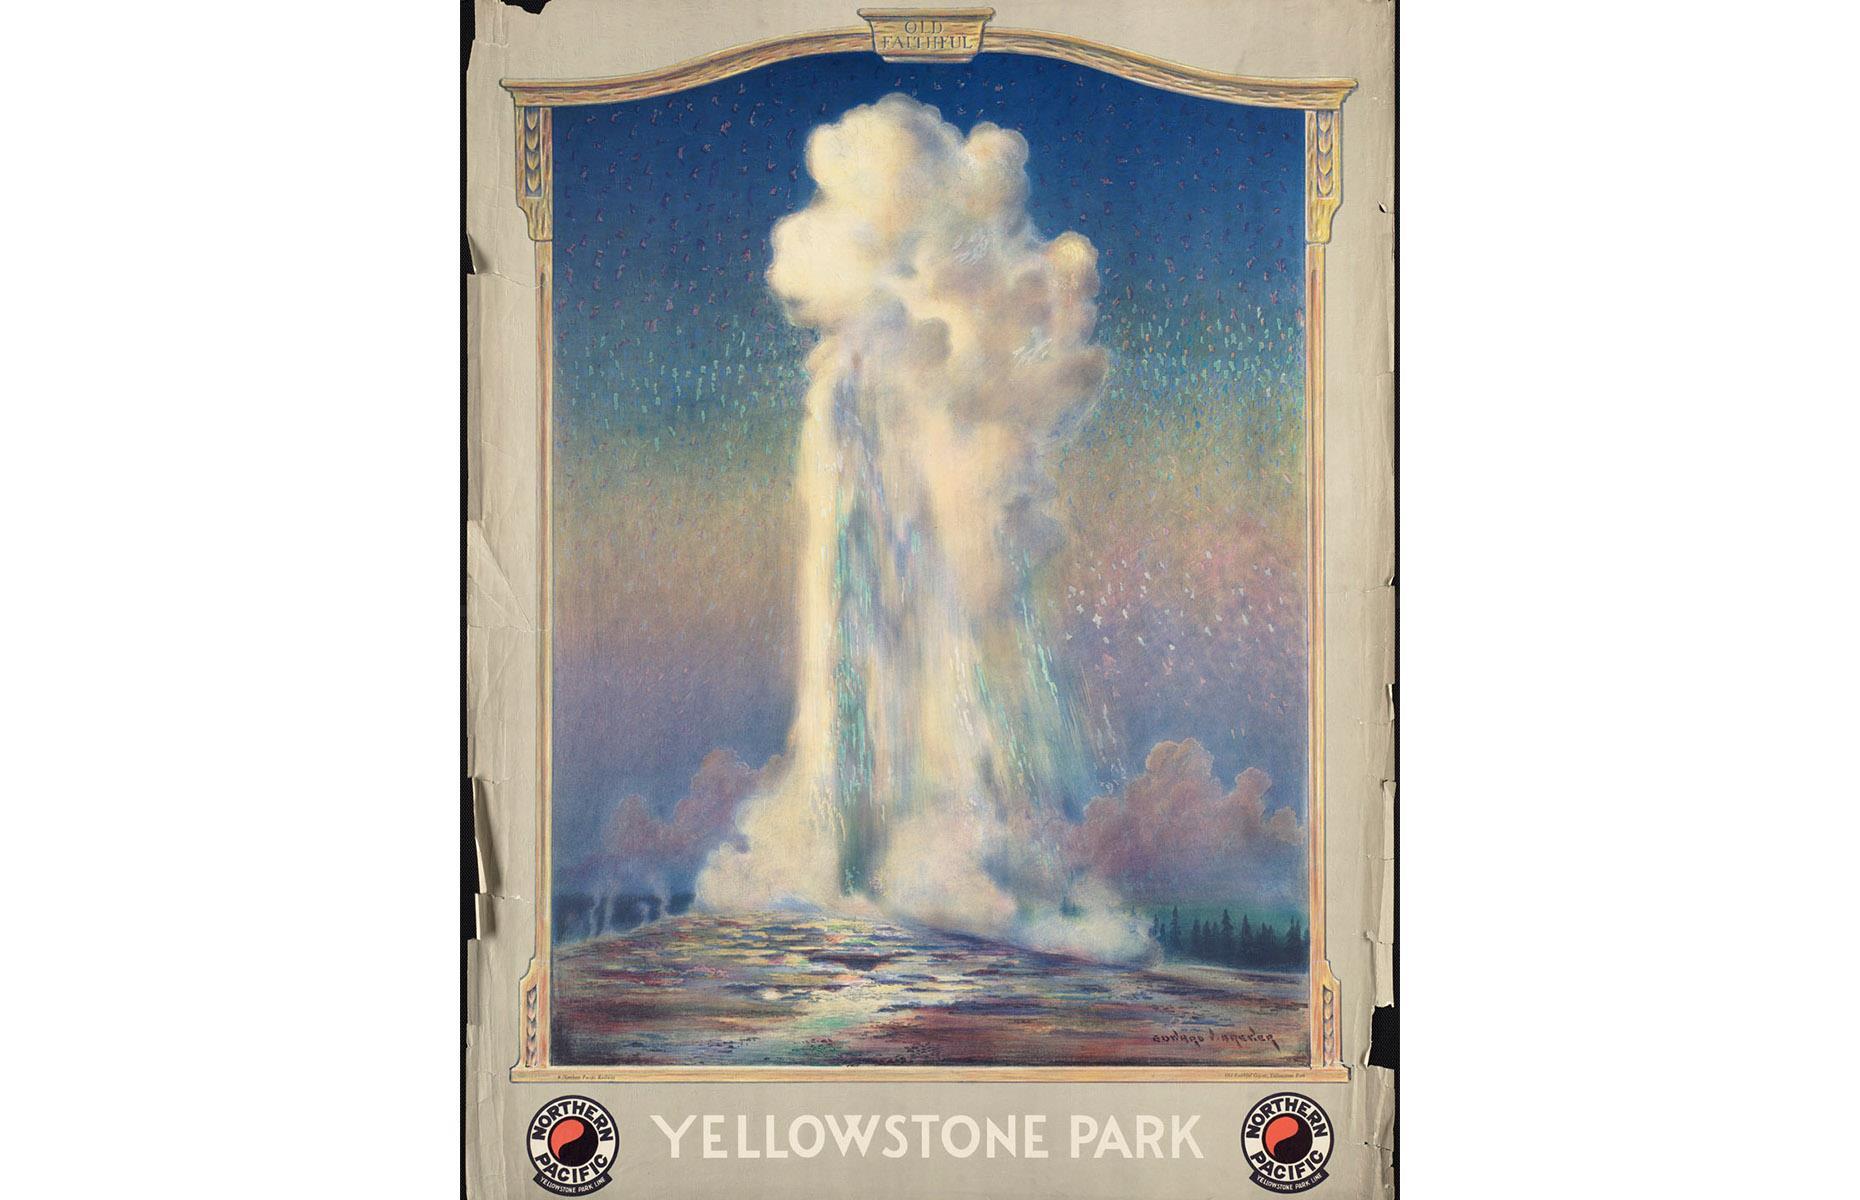 Few images of Yellowstone National Park are more iconic than the waters of Old Faithful geyser soaring into the sky, and this ad looks almost more like a fine art piece than a promotional poster. The beautiful imagery was used by Northern Pacific Railway to push rail routes to the historic national park.